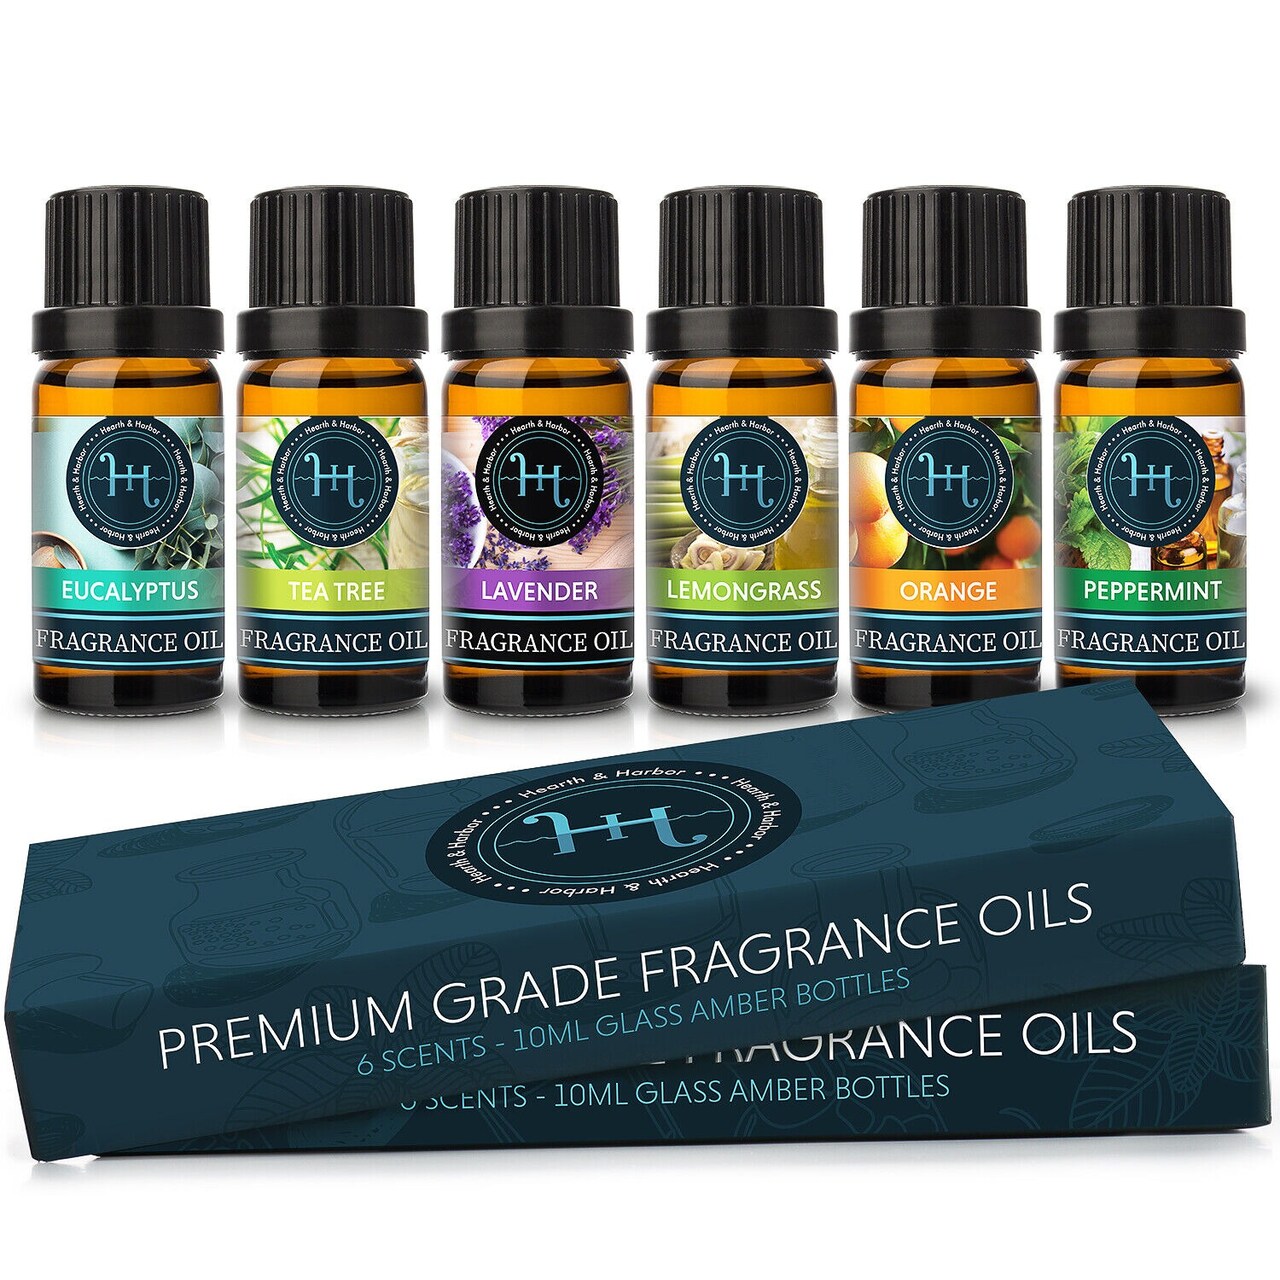 6 Premium Fragrance Oils for Candles, and Soap